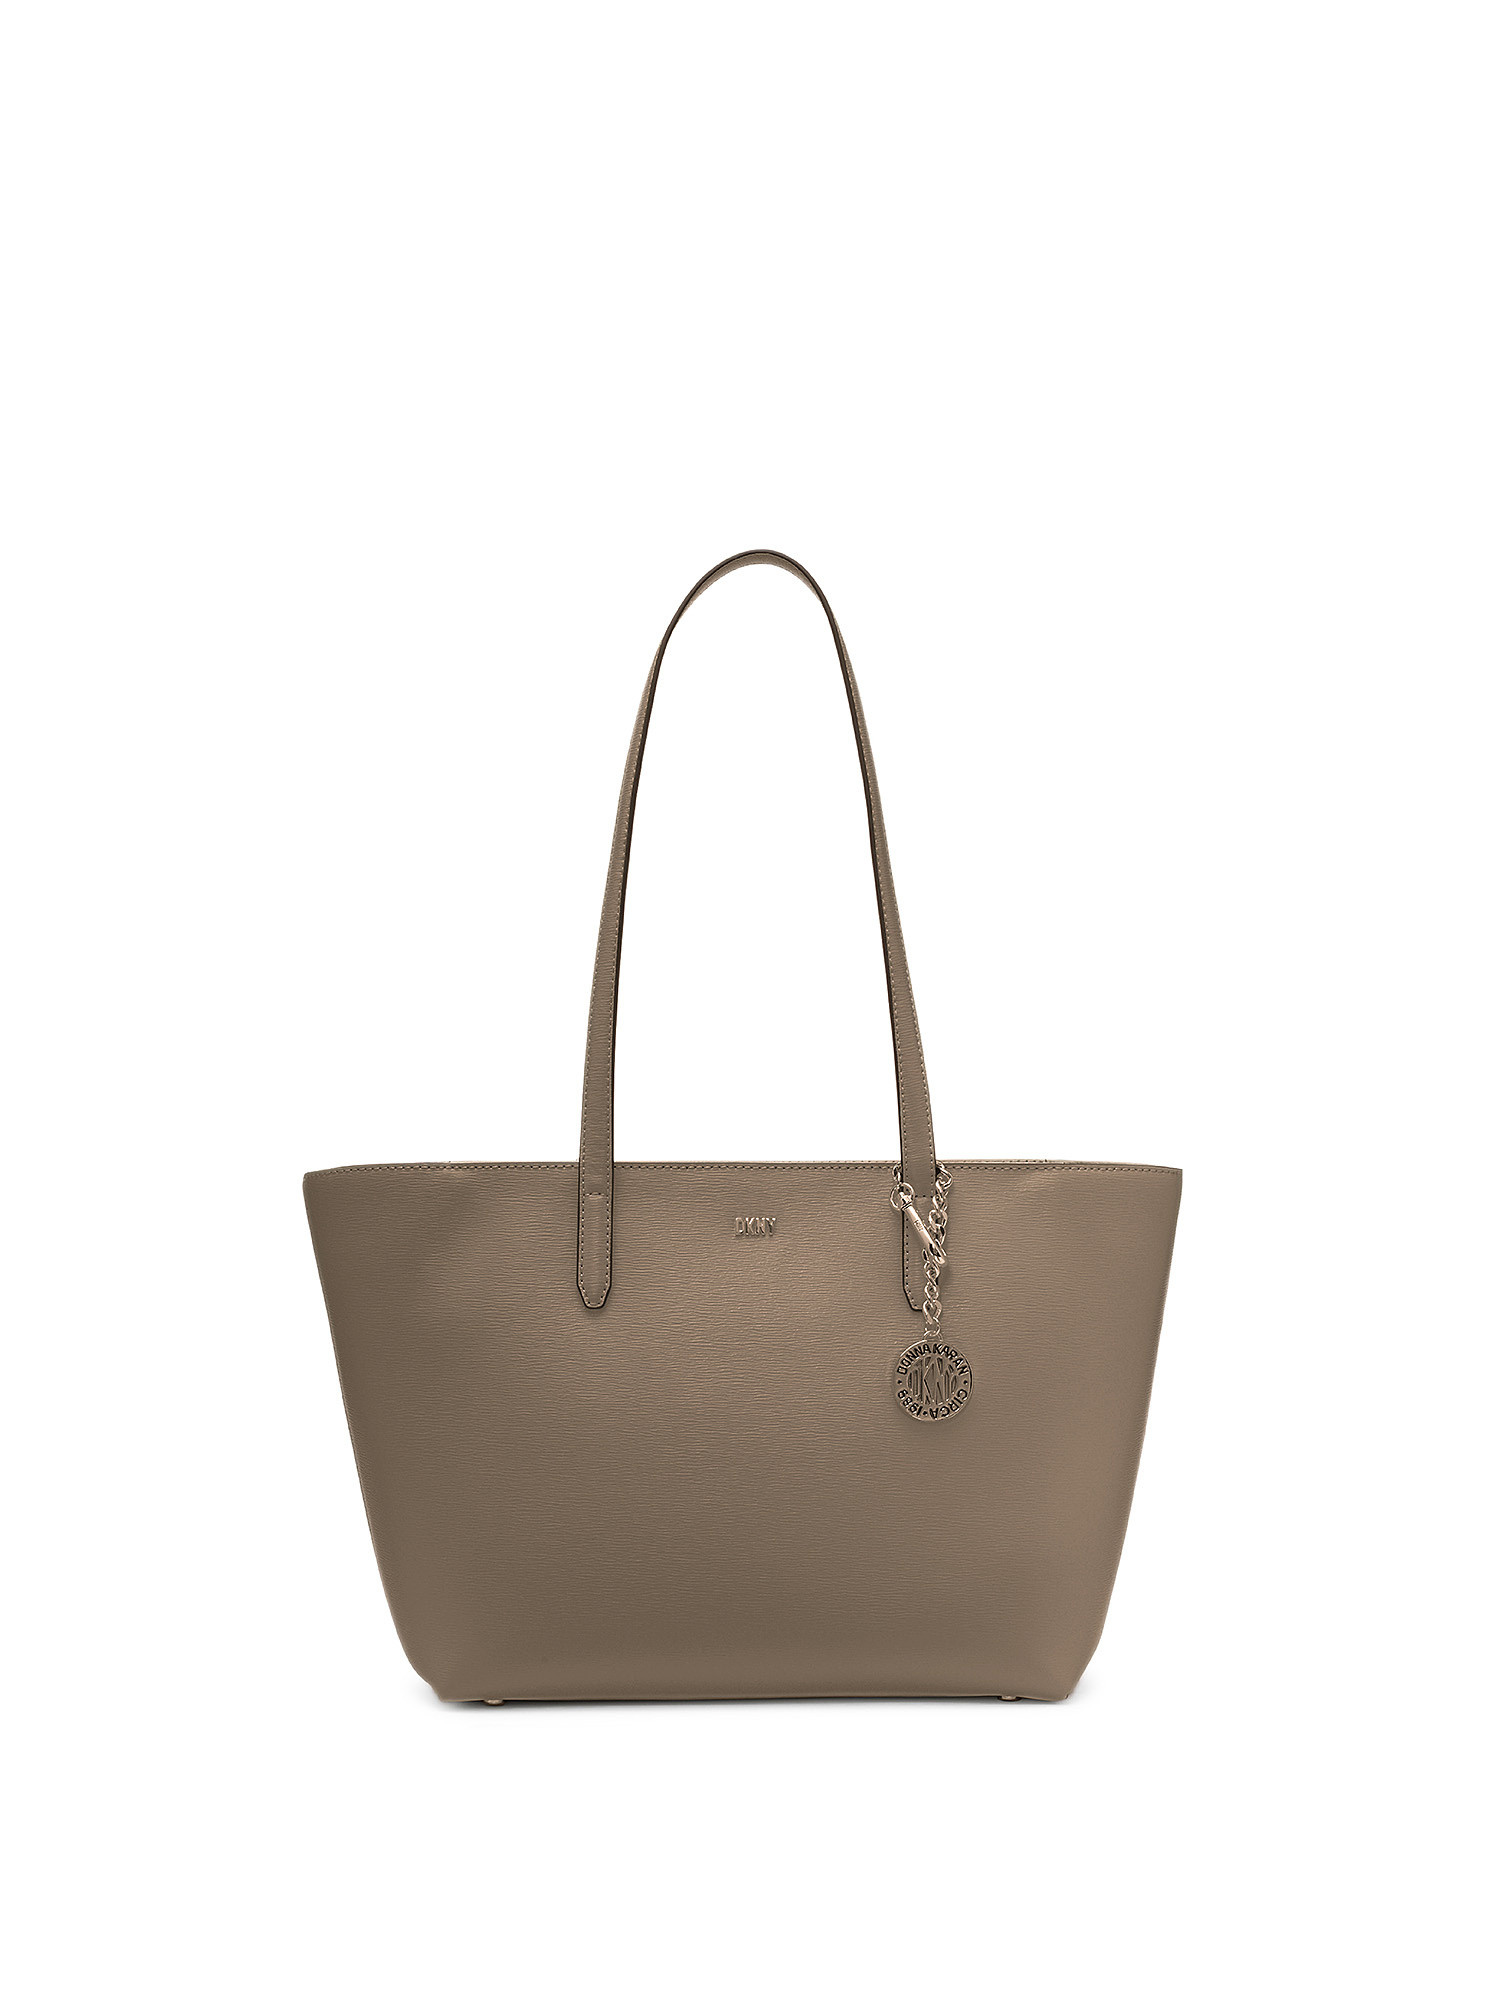 Dkny - Tote bag with removable accessory, Brown, large image number 0